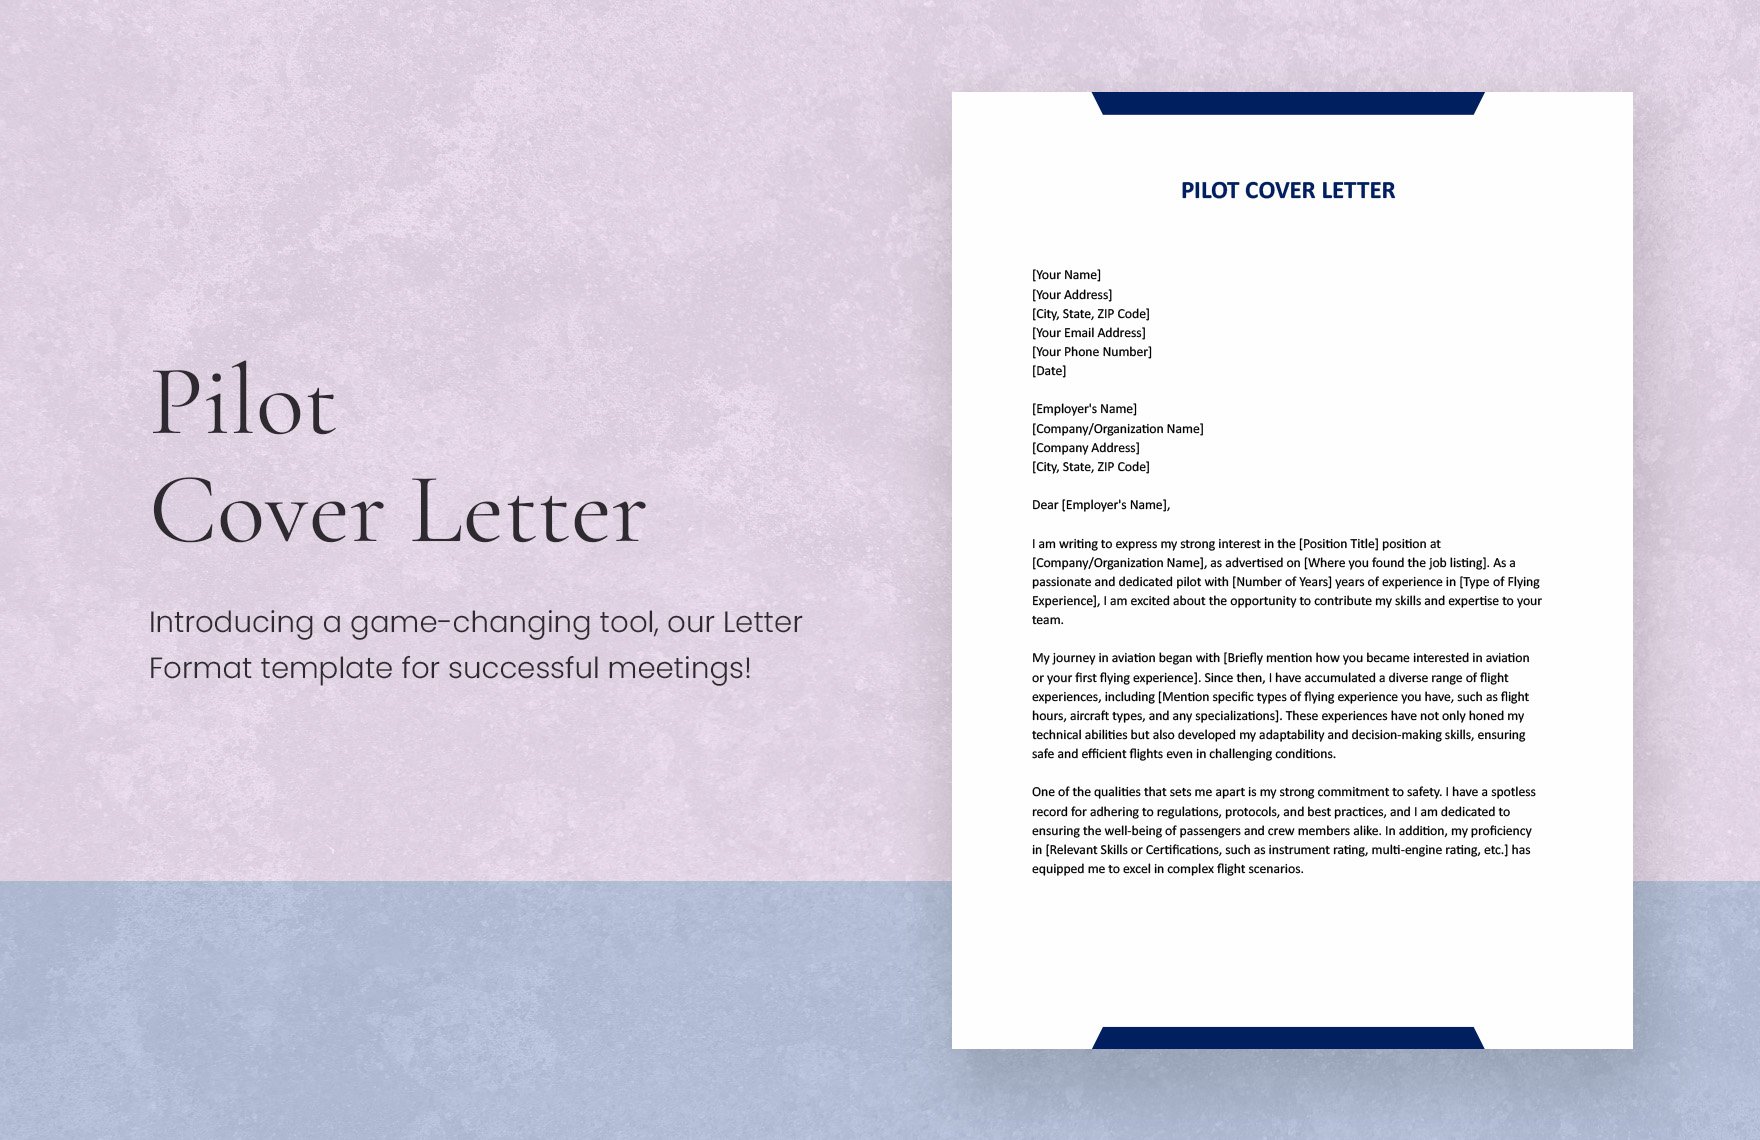 Pilot Cover Letter in Word, Google Docs, Apple Pages